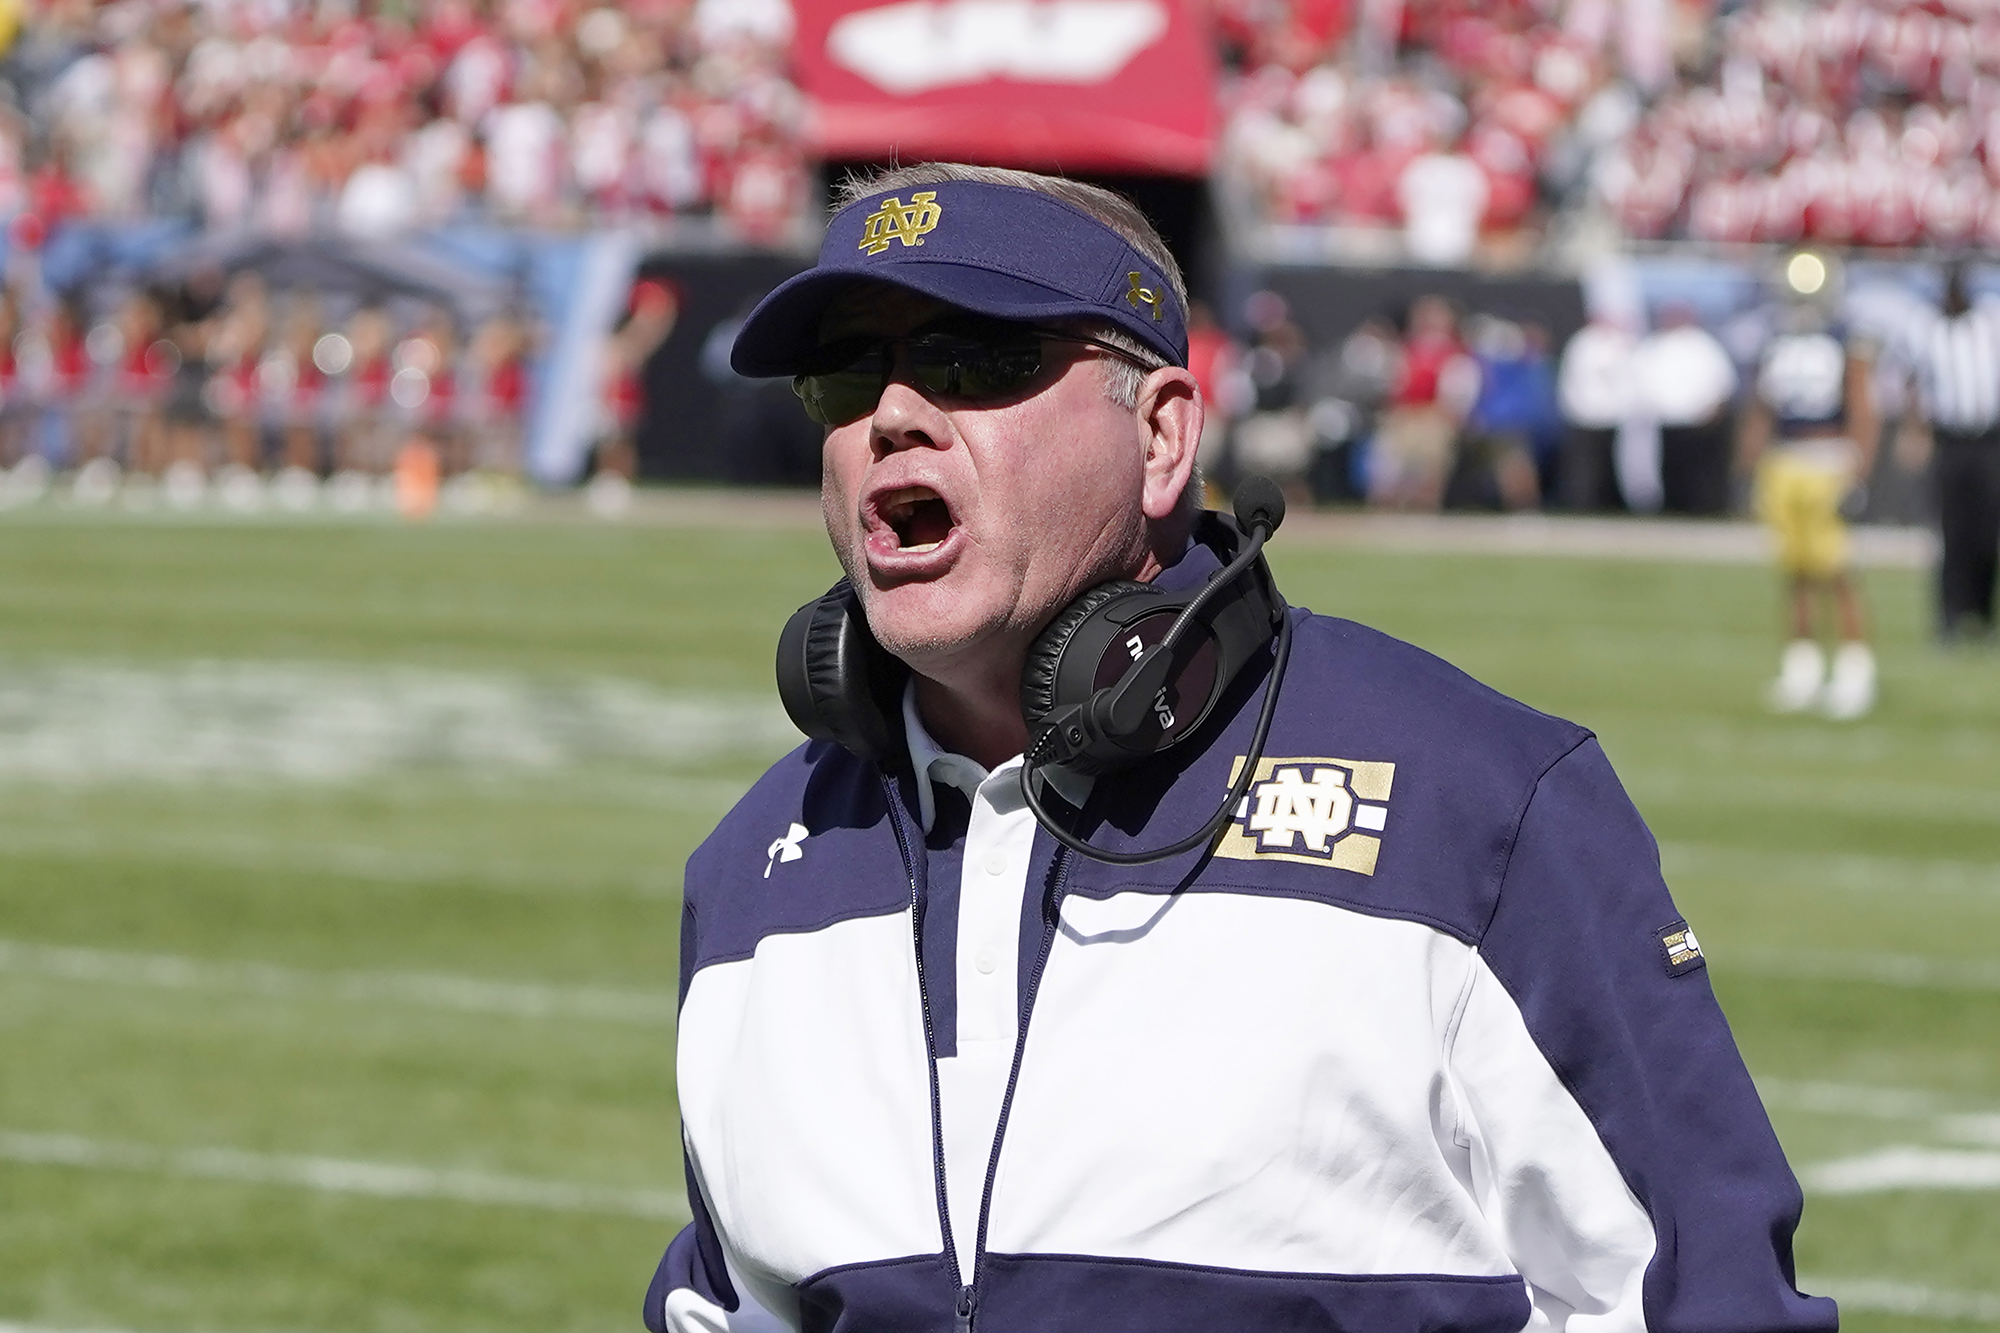 Brian Kelly’s exit from Notre Dame hasty obtained messy